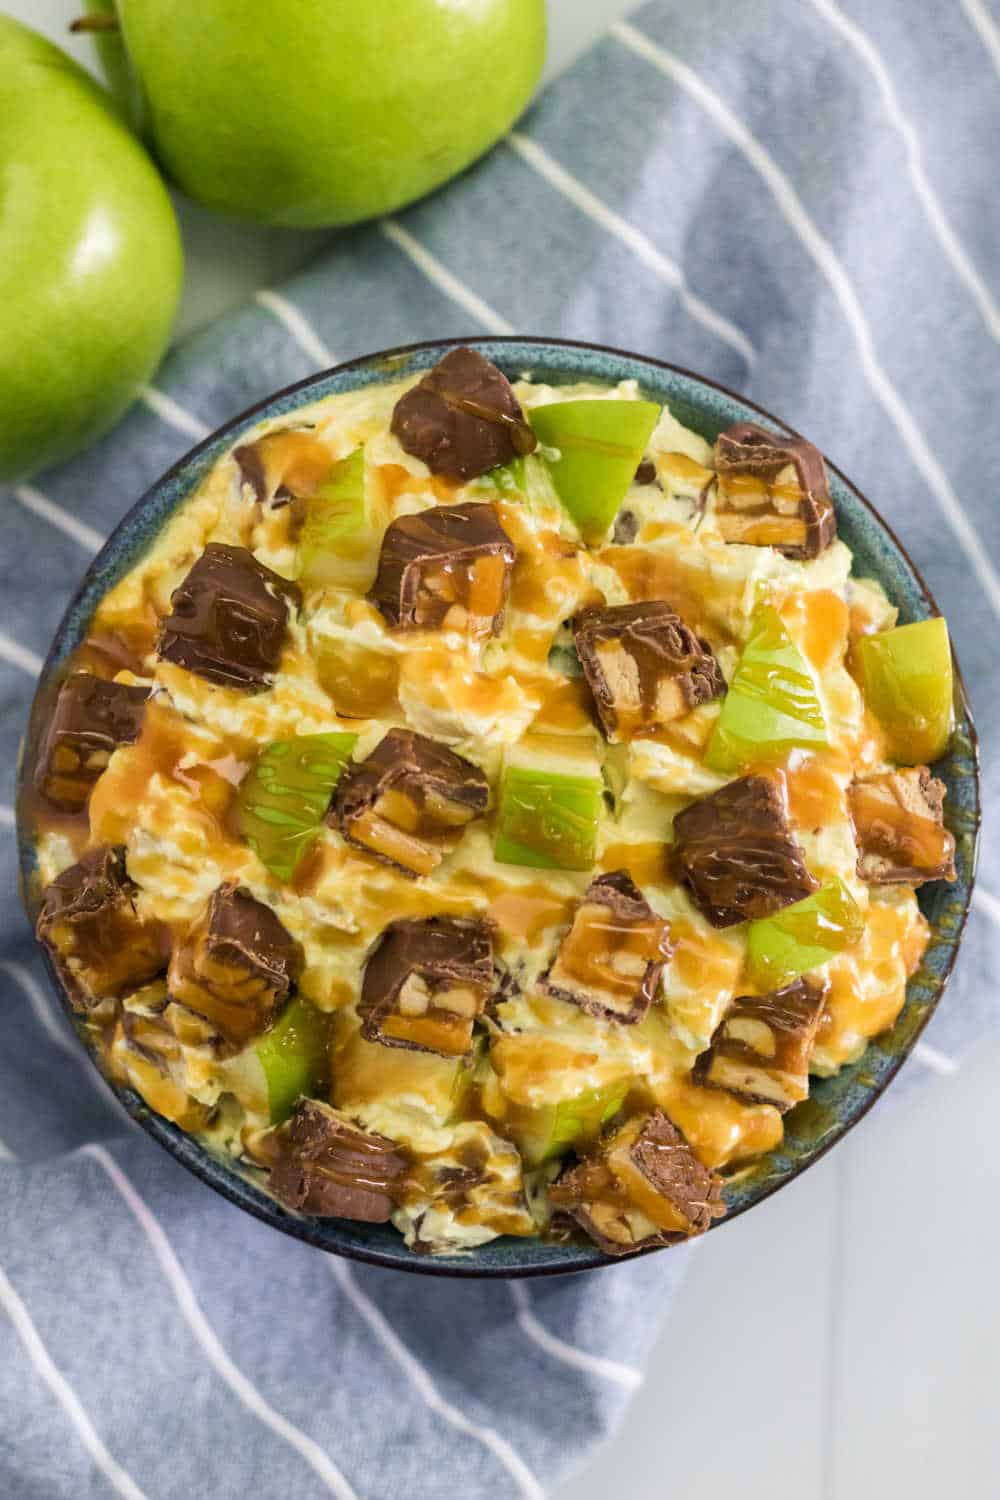 Snickers Salad Recipe - One of the best dessert salad recipes ever! This easy recipe is made with vanilla pudding, green apples, Cool Whip, caramel and loads of Snickers bars.